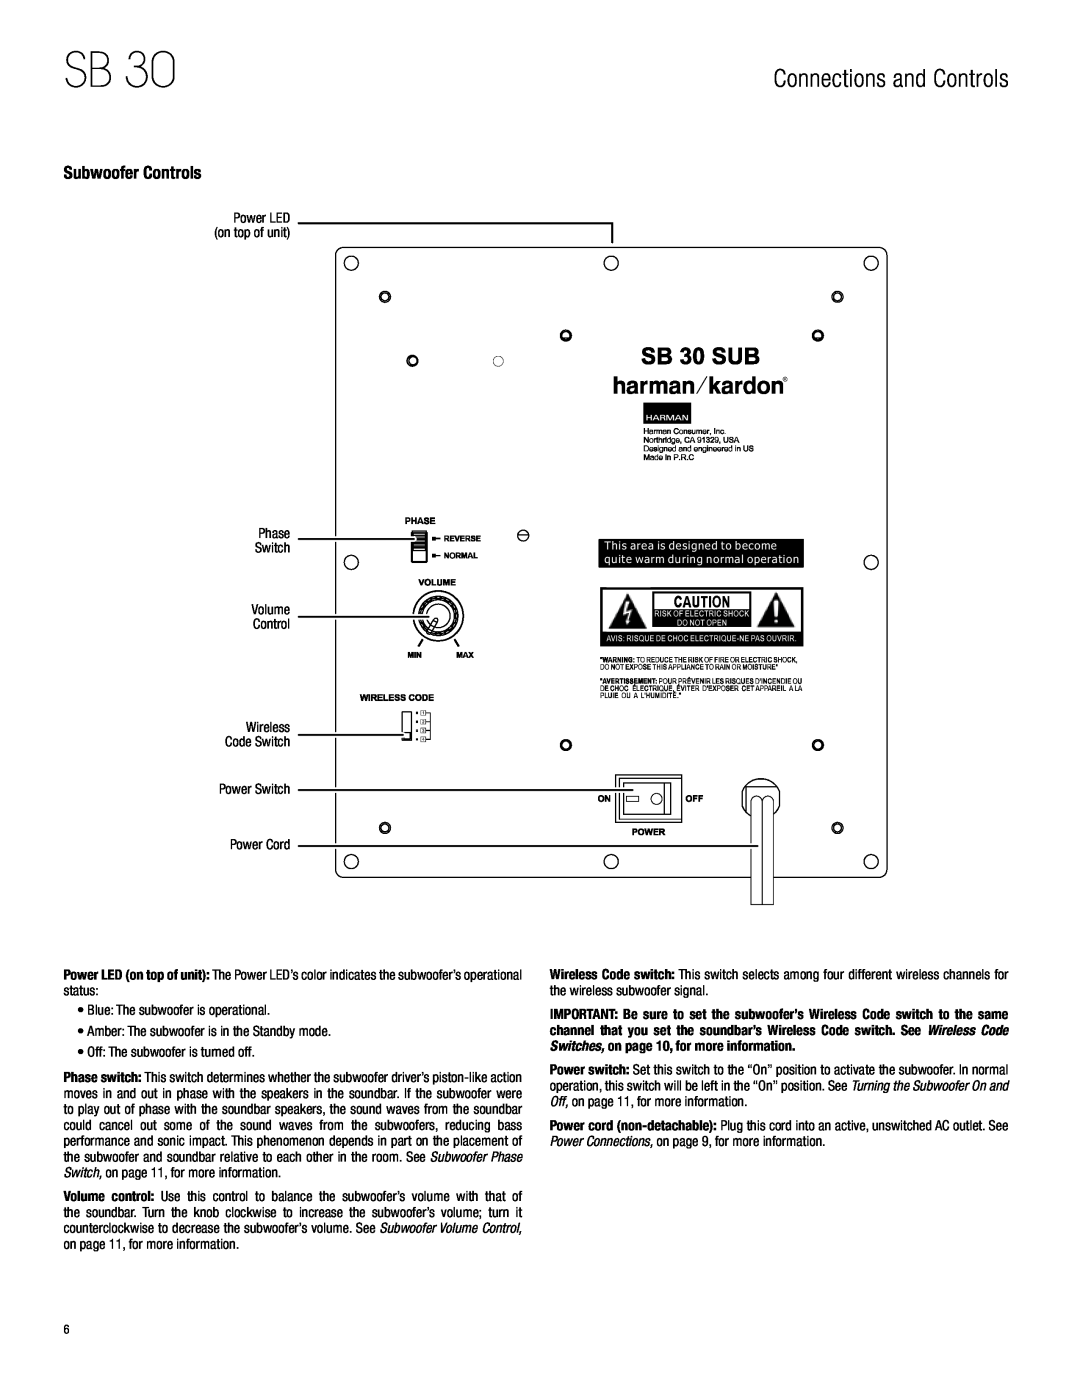 Harman-Kardon SB 30 Subwoofer Controls, Connections and Controls, Phase Switch Volume Control, Power Switch, Power Cord 